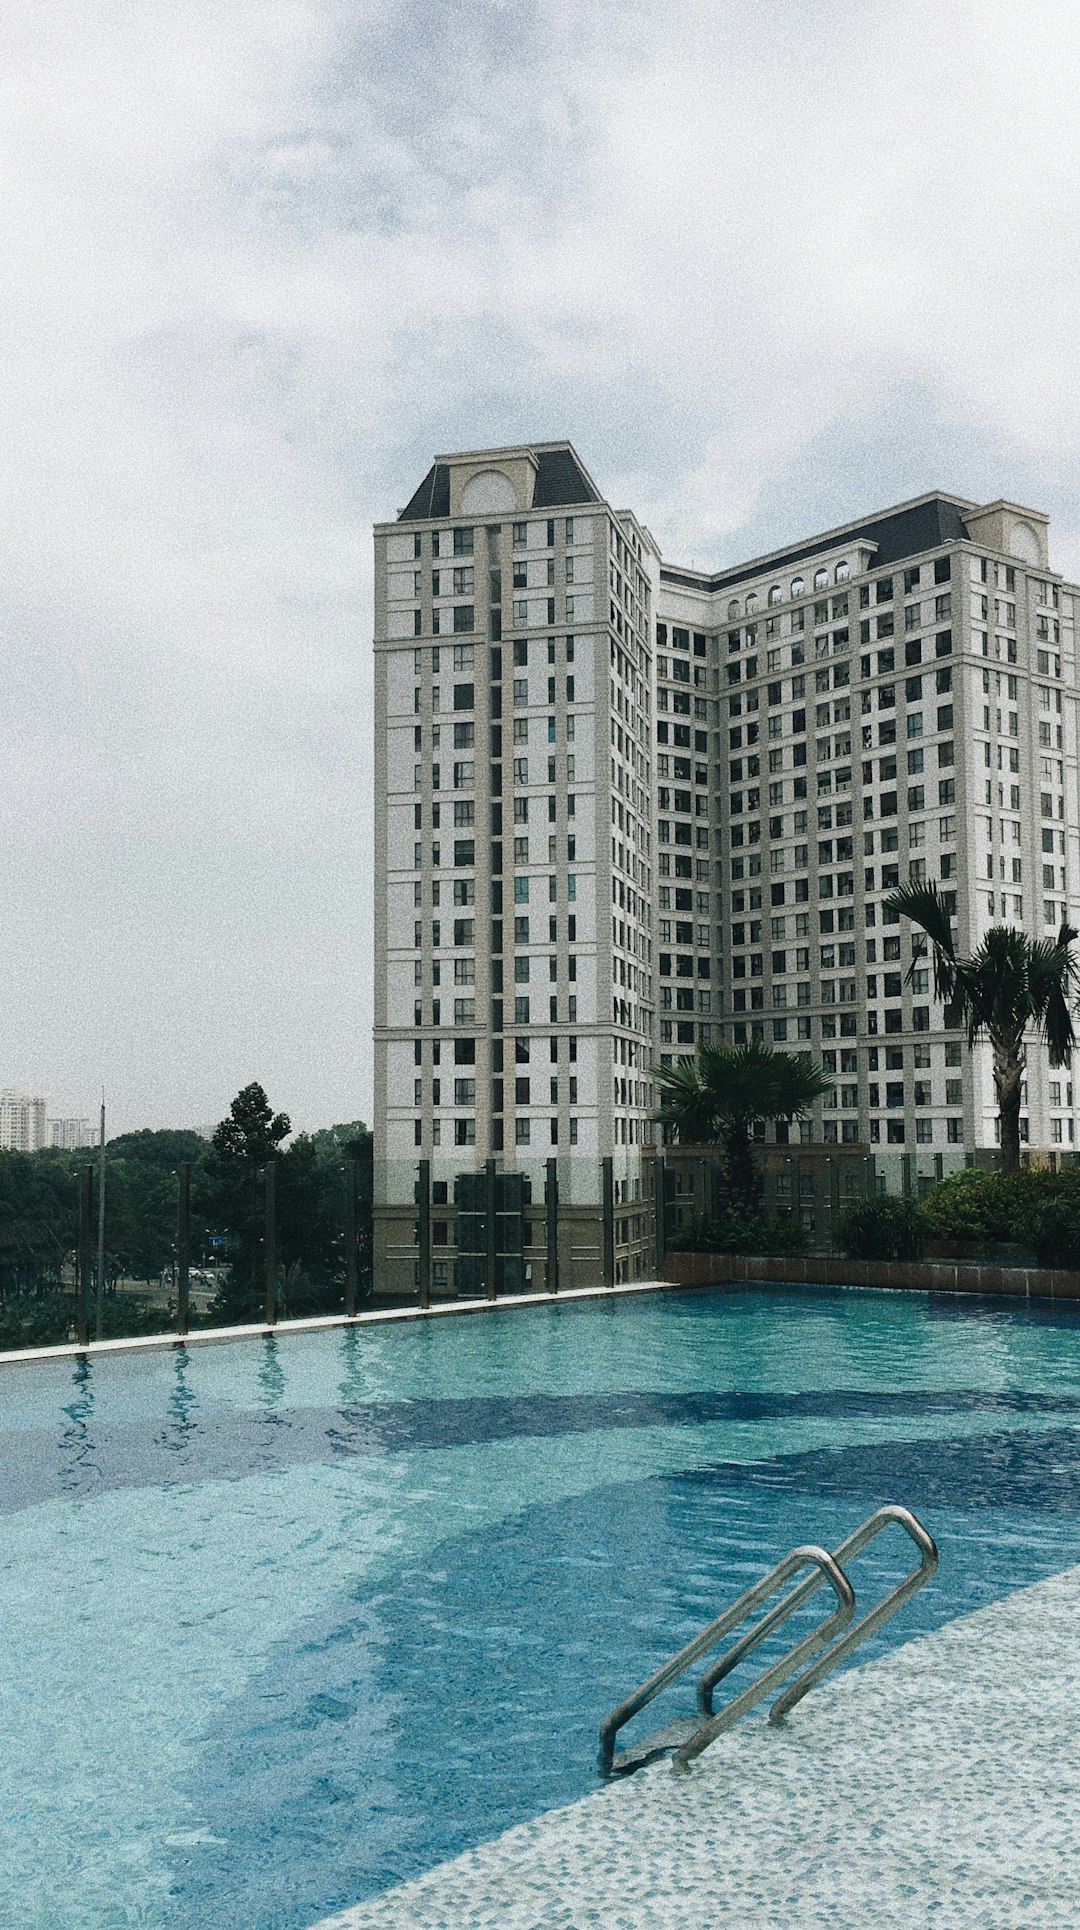 travelers stories about Swimming pool in 130 Đường Hồng Hà, Vietnam